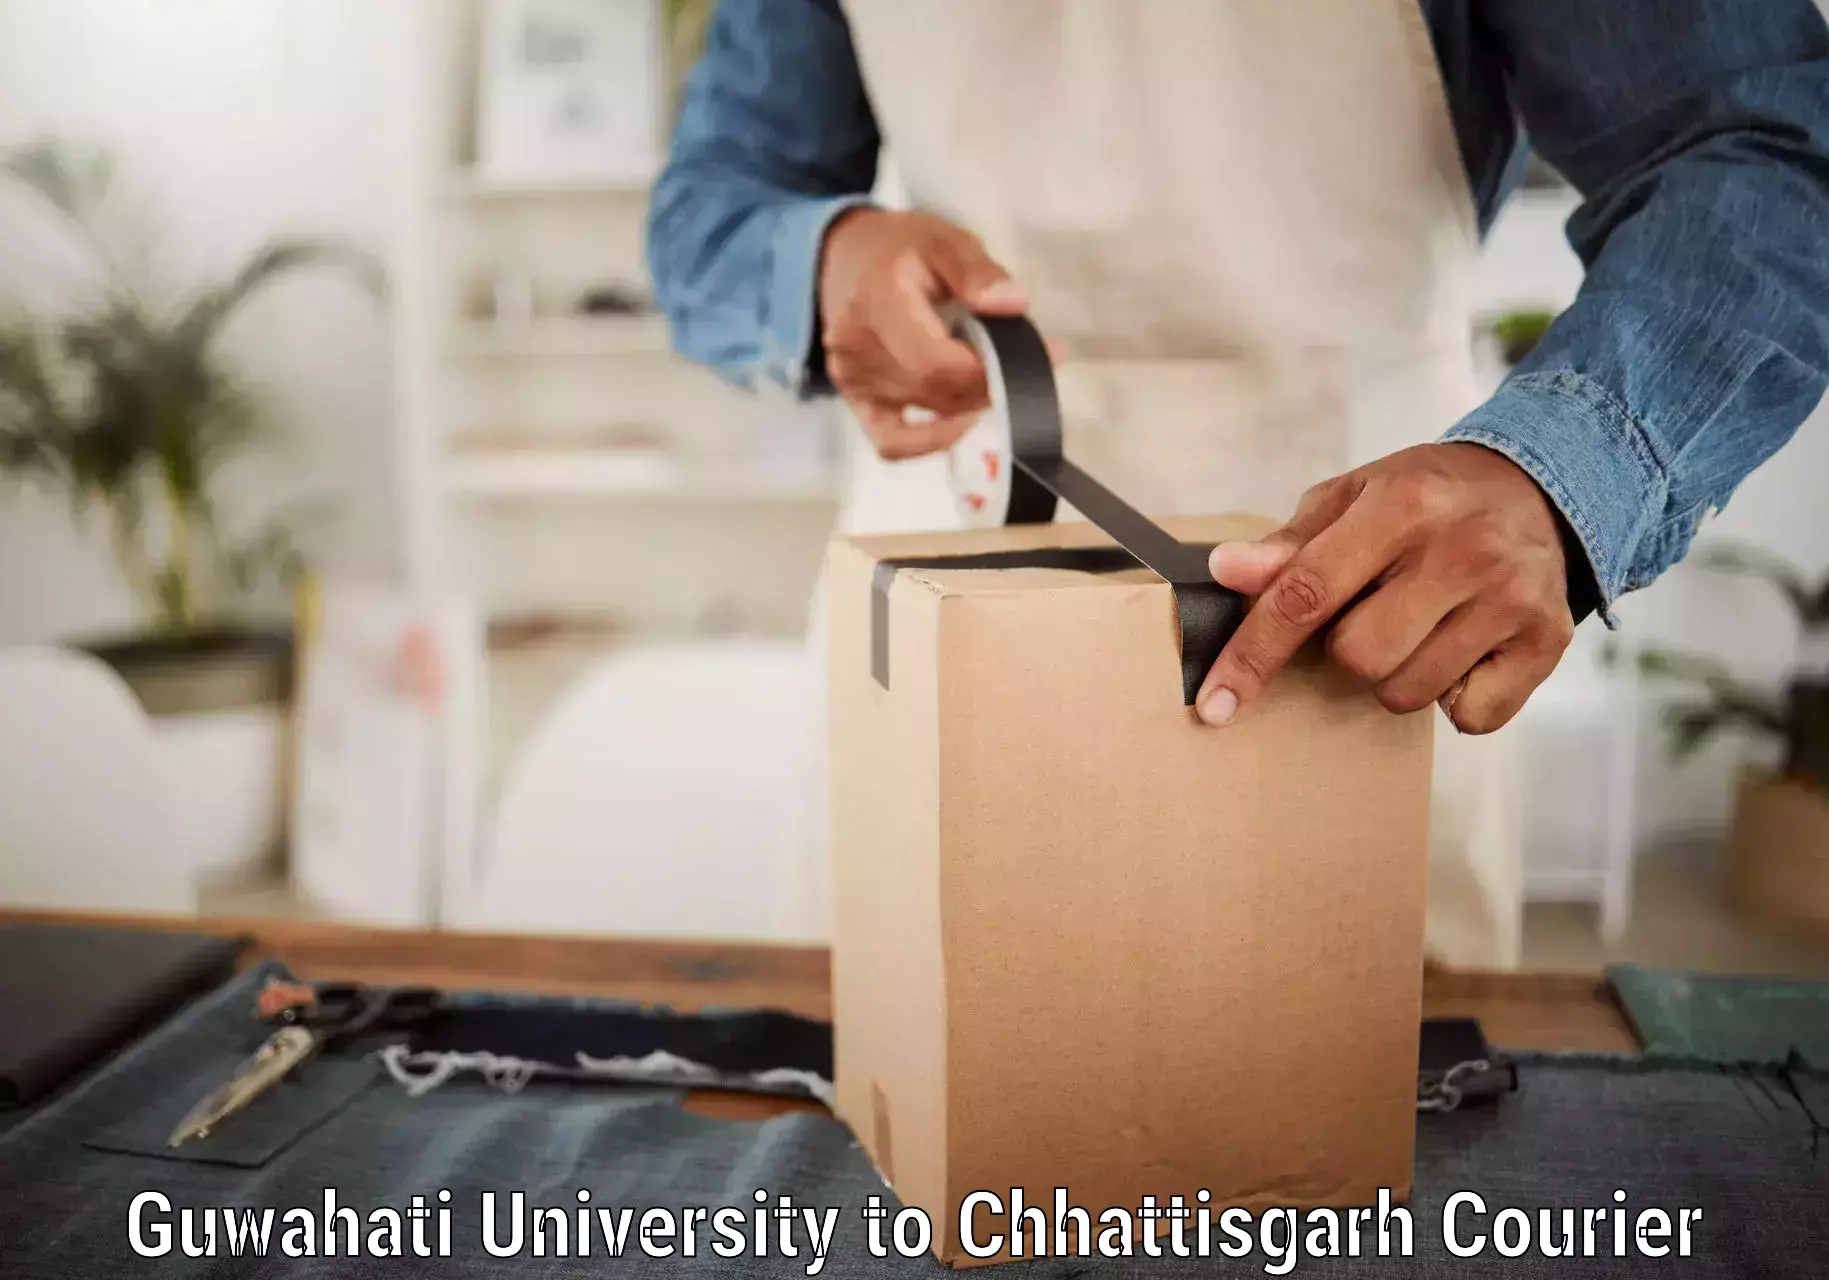 Easy access courier services Guwahati University to Shivrinarayan